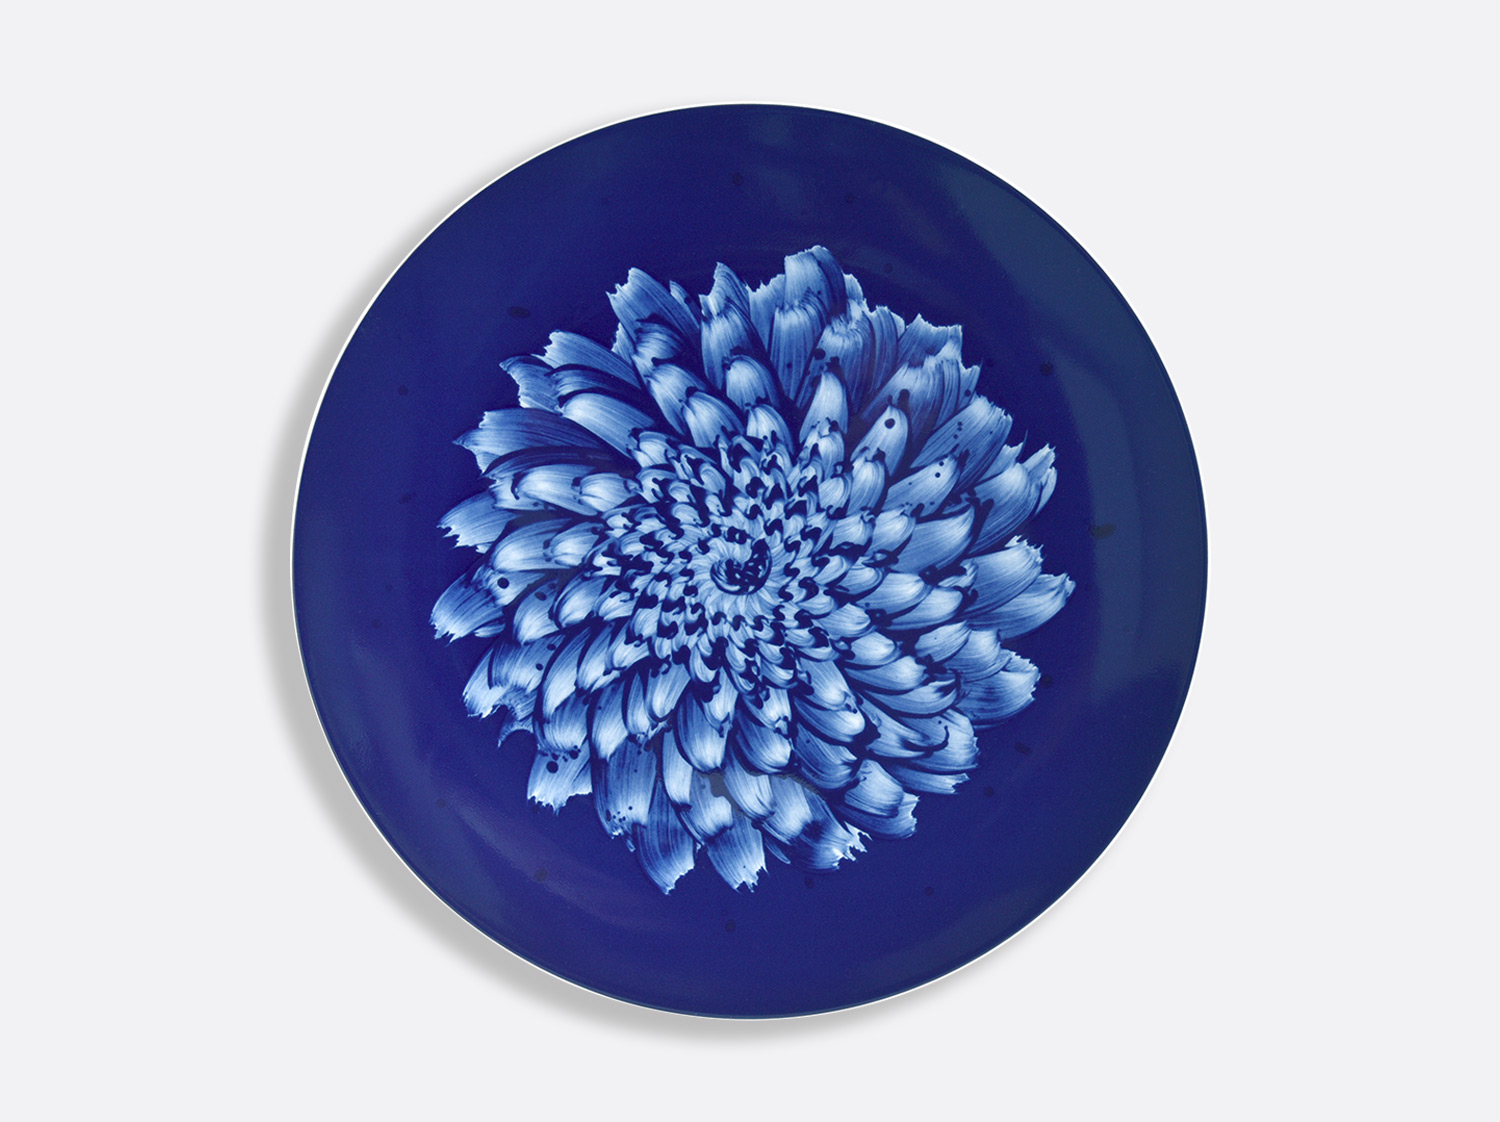 China Ultra flat service plate 12.2'' of the collection IN BLOOM - Zemer Peled | Bernardaud